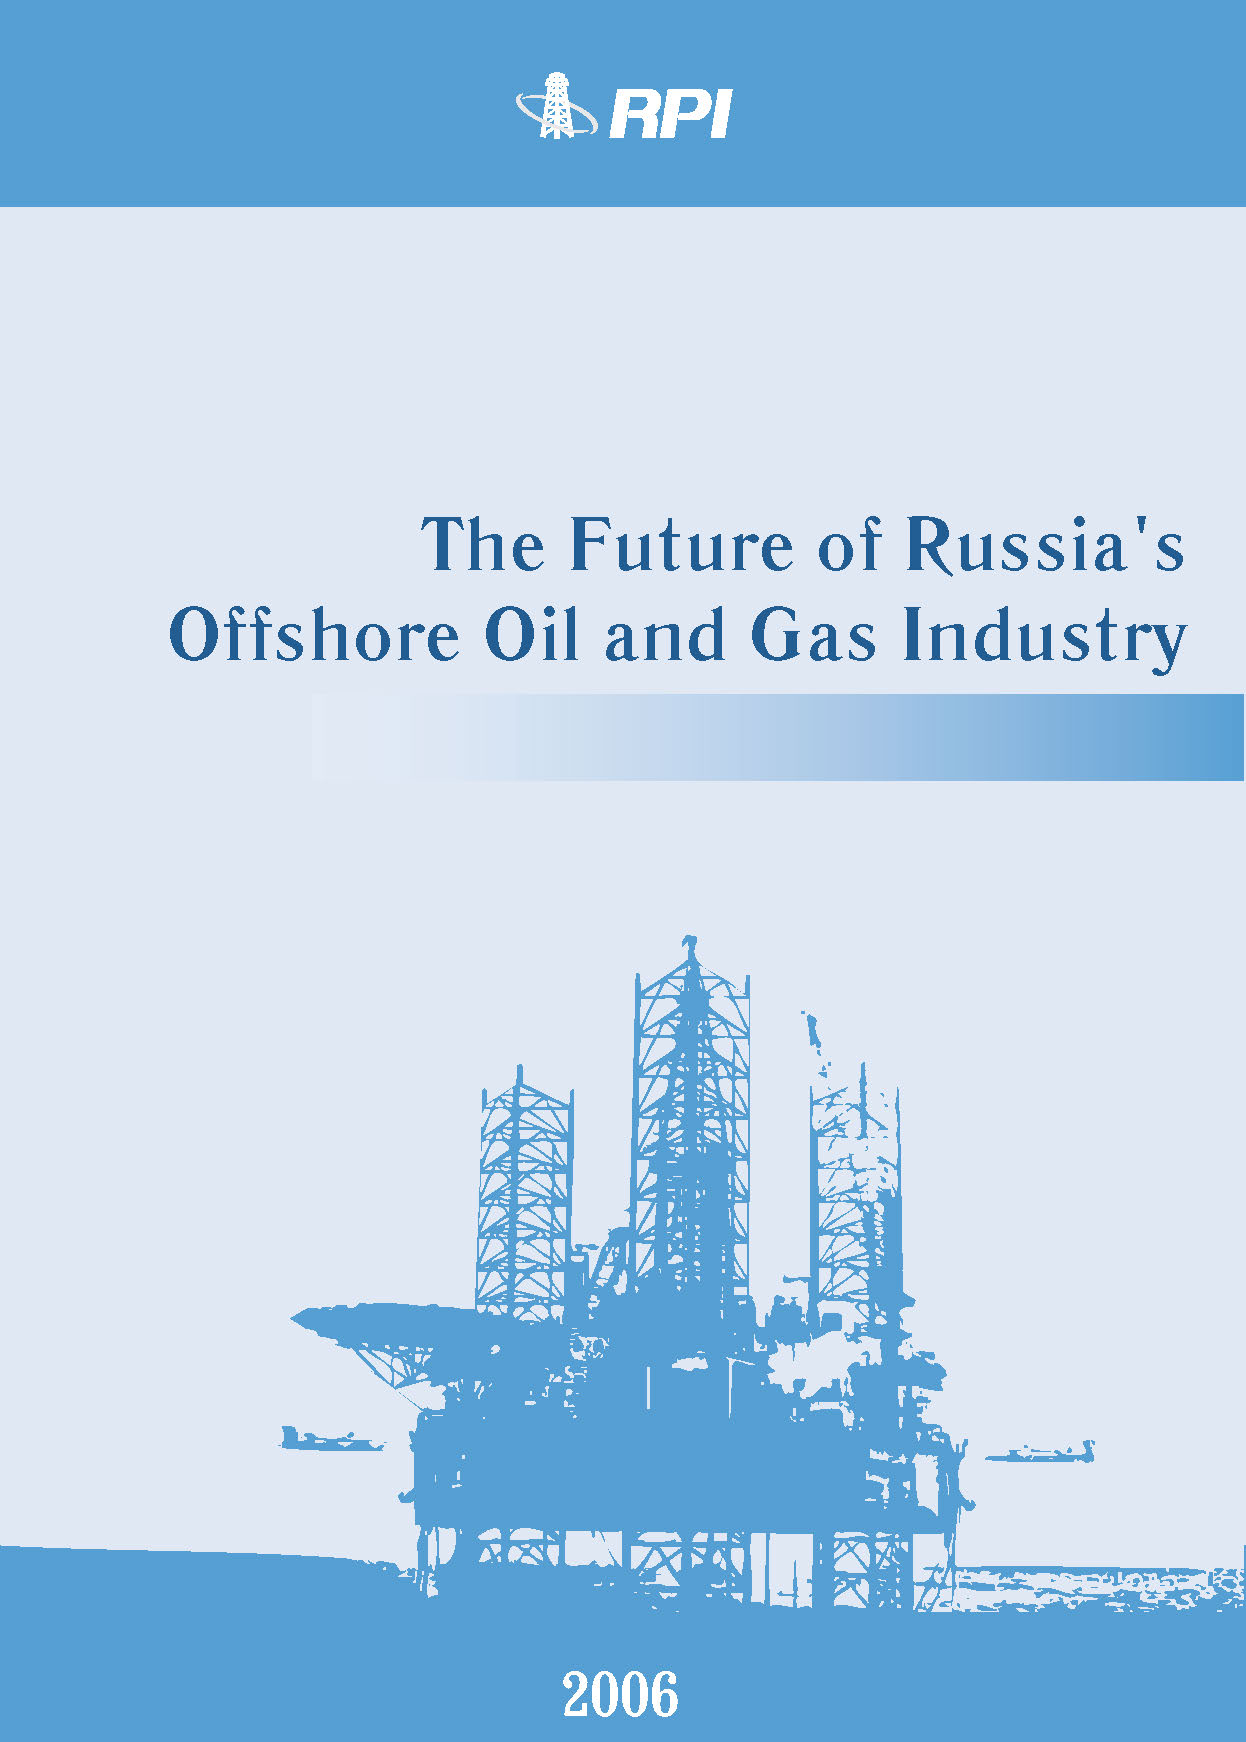 The Future of Oil Exports from Russia